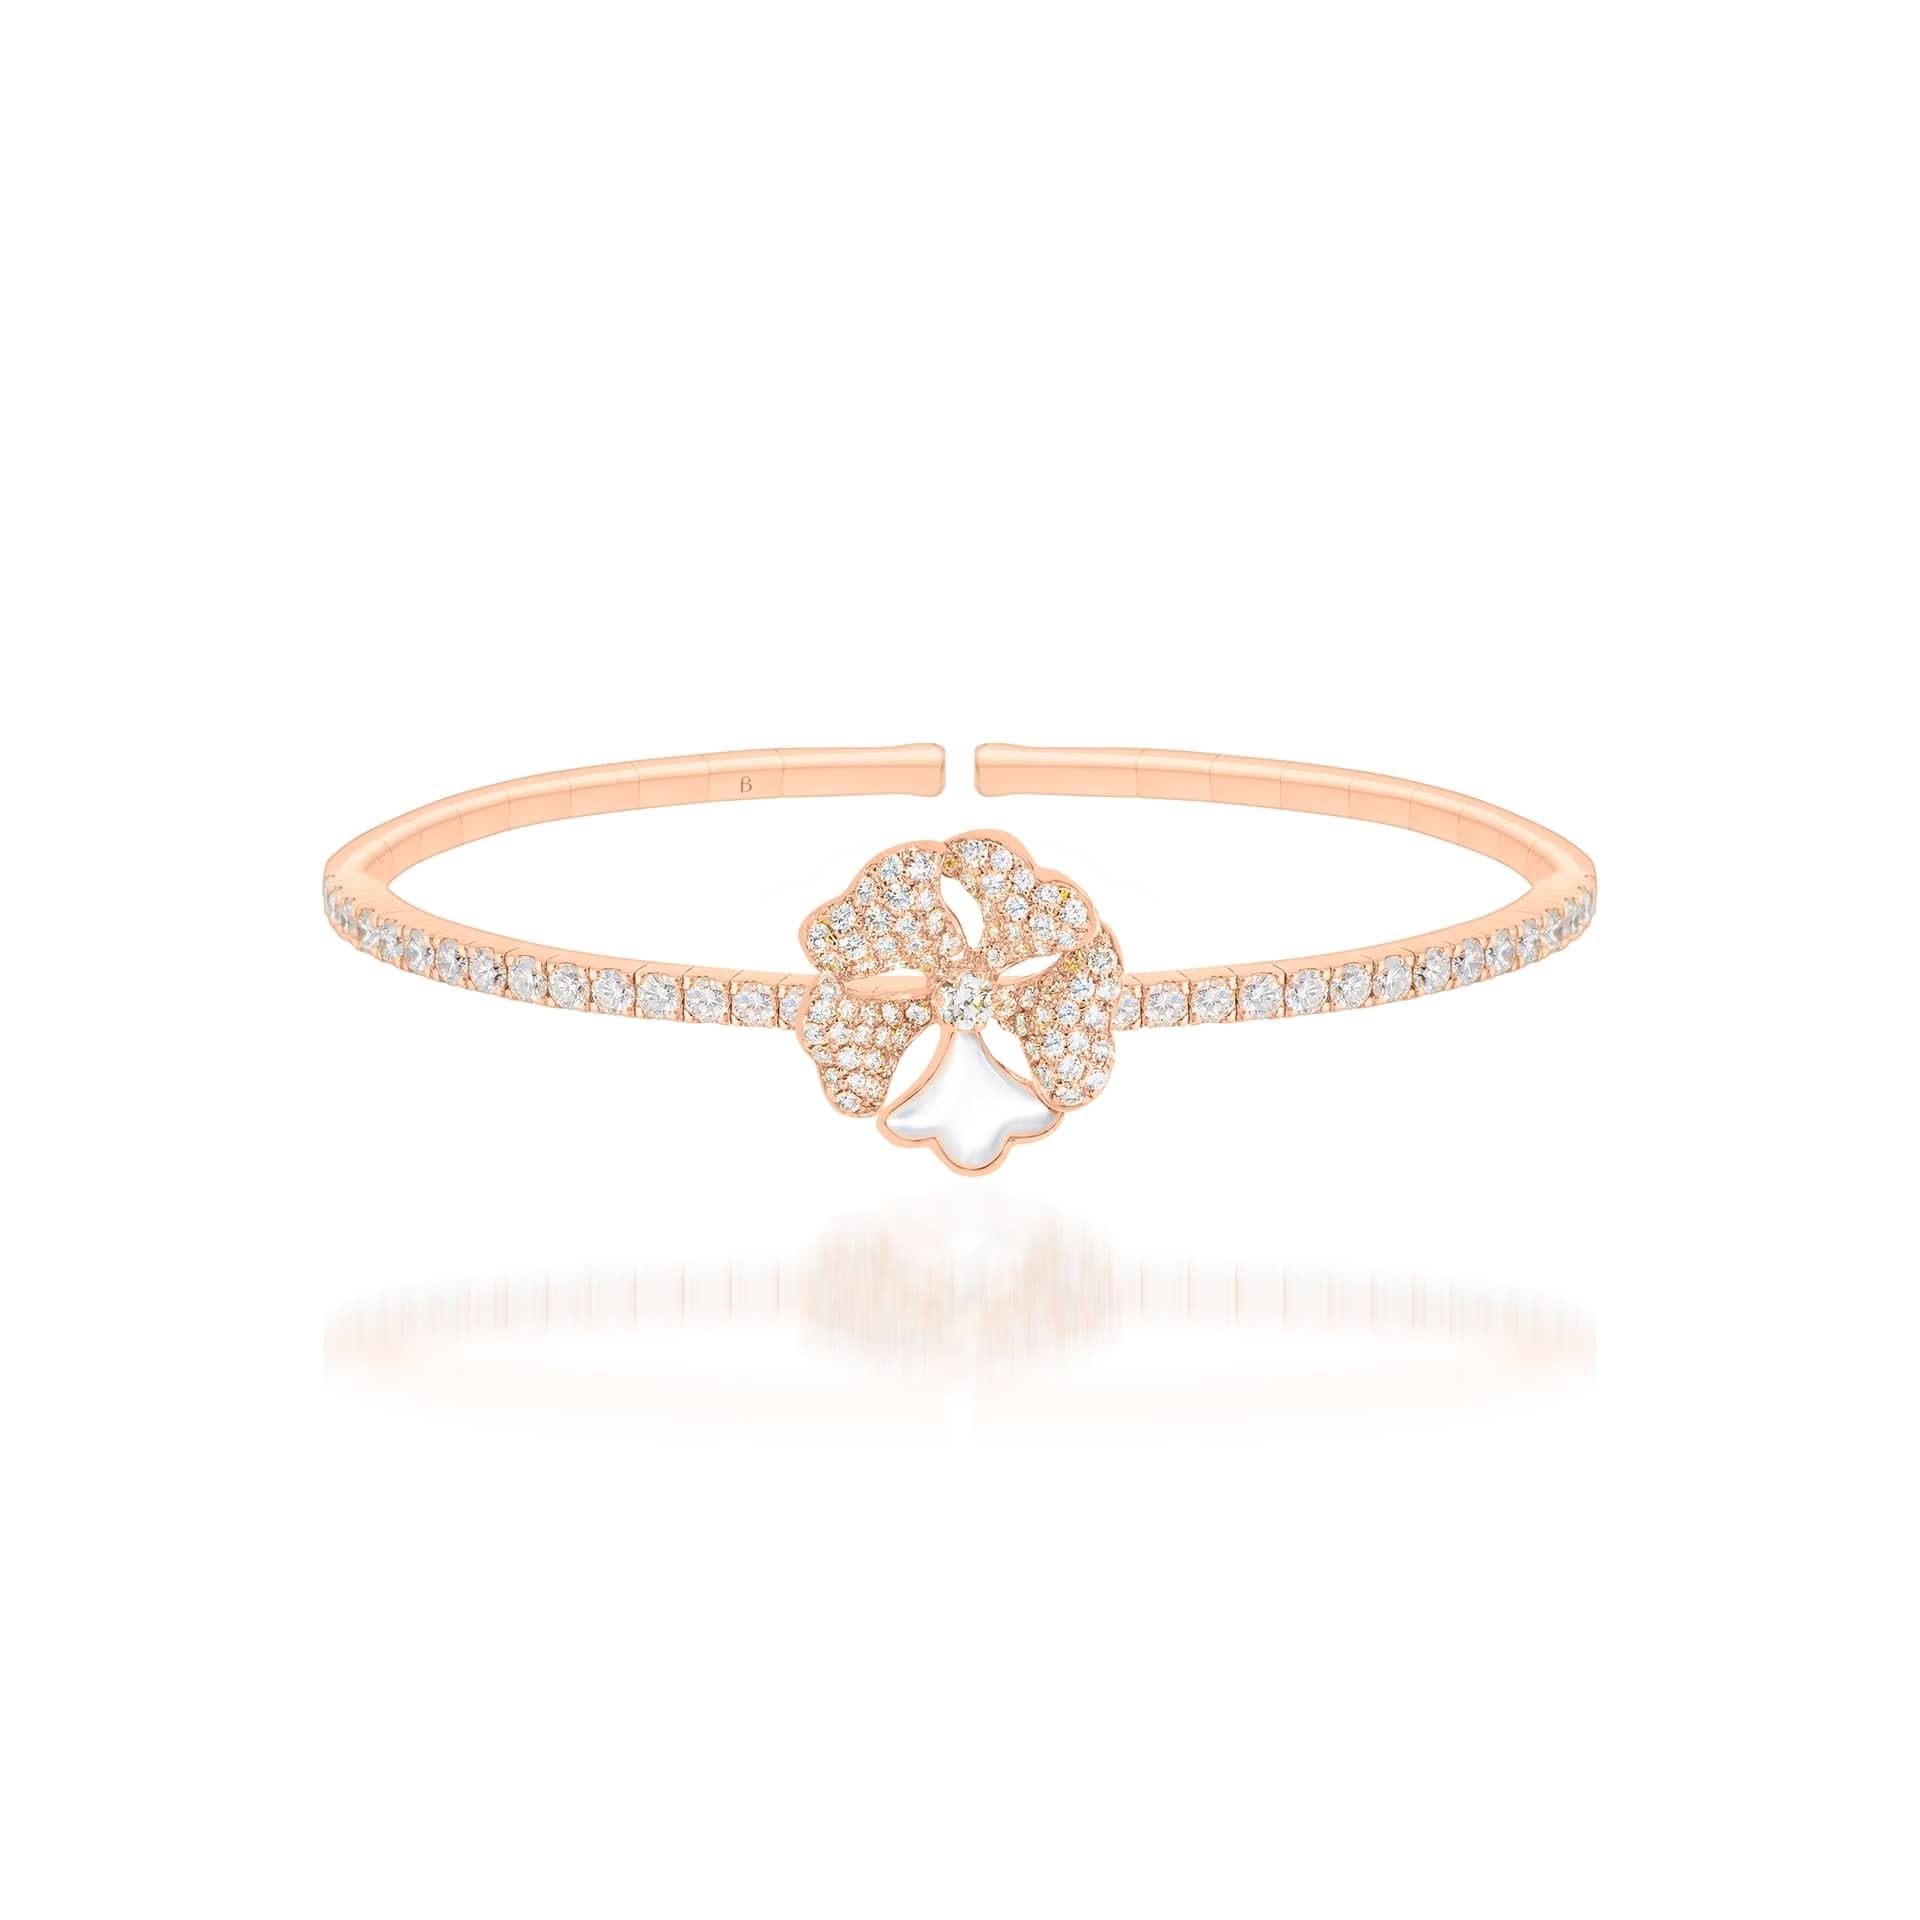 Bloom Diamond and White Mother-of-Pearl Solo Flower Bangle in 18K Rose Gold

Inspired by the exquisite petals of the alpine cinquefoil flower, the Bloom collection combines the richness of diamonds and precious metals with the light versatility of